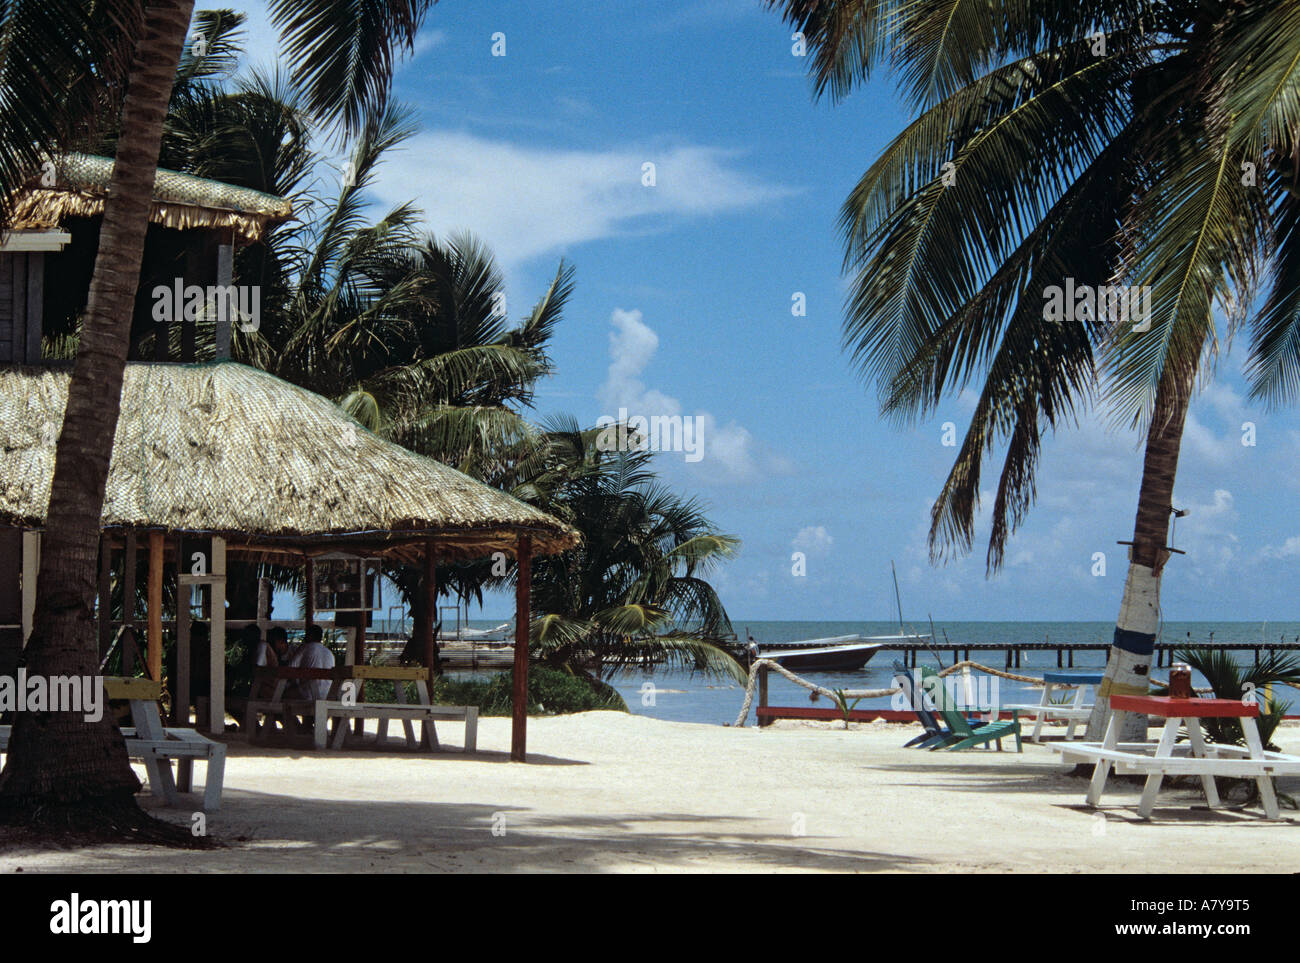 POPEYE'S BAR and Palm trees on the beach overlooking the Caribbean sea. Caye Caulker Belize Central America Stock Photo